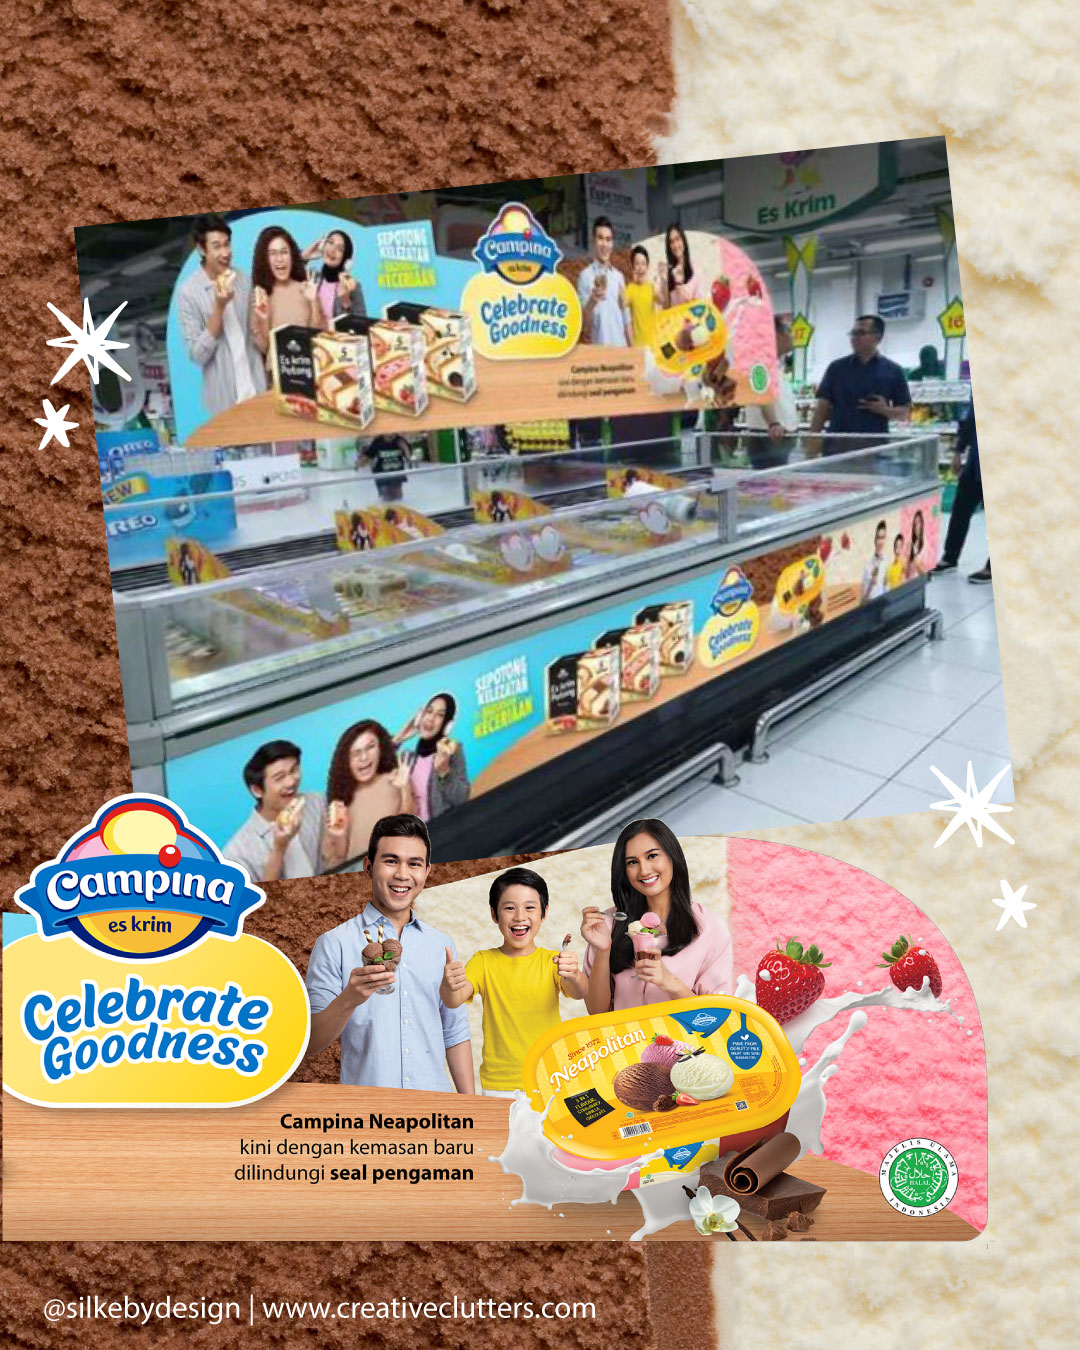 POS Design and Creative Production for Campina Neapolitan Product., by Creative Clutters